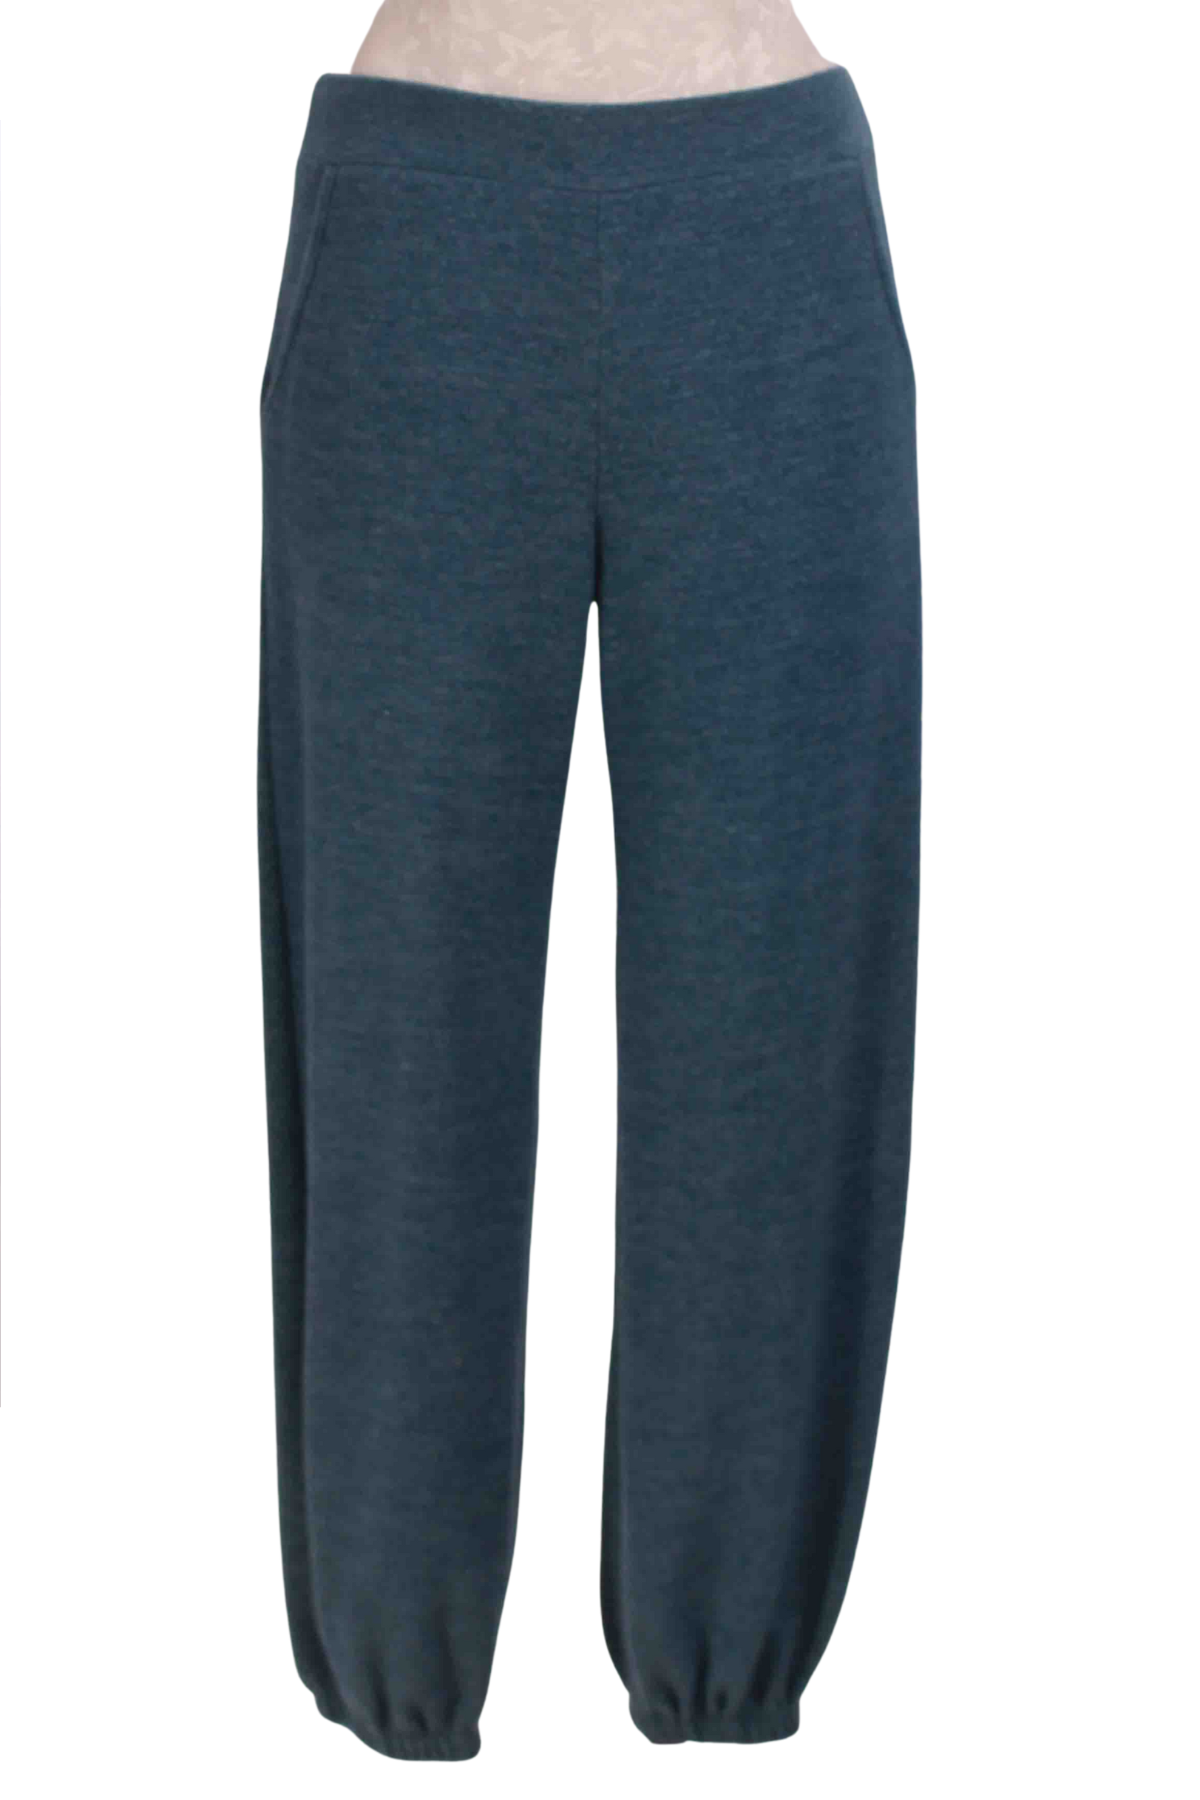 Blue Brushed Long Straight Jogger by Inoah